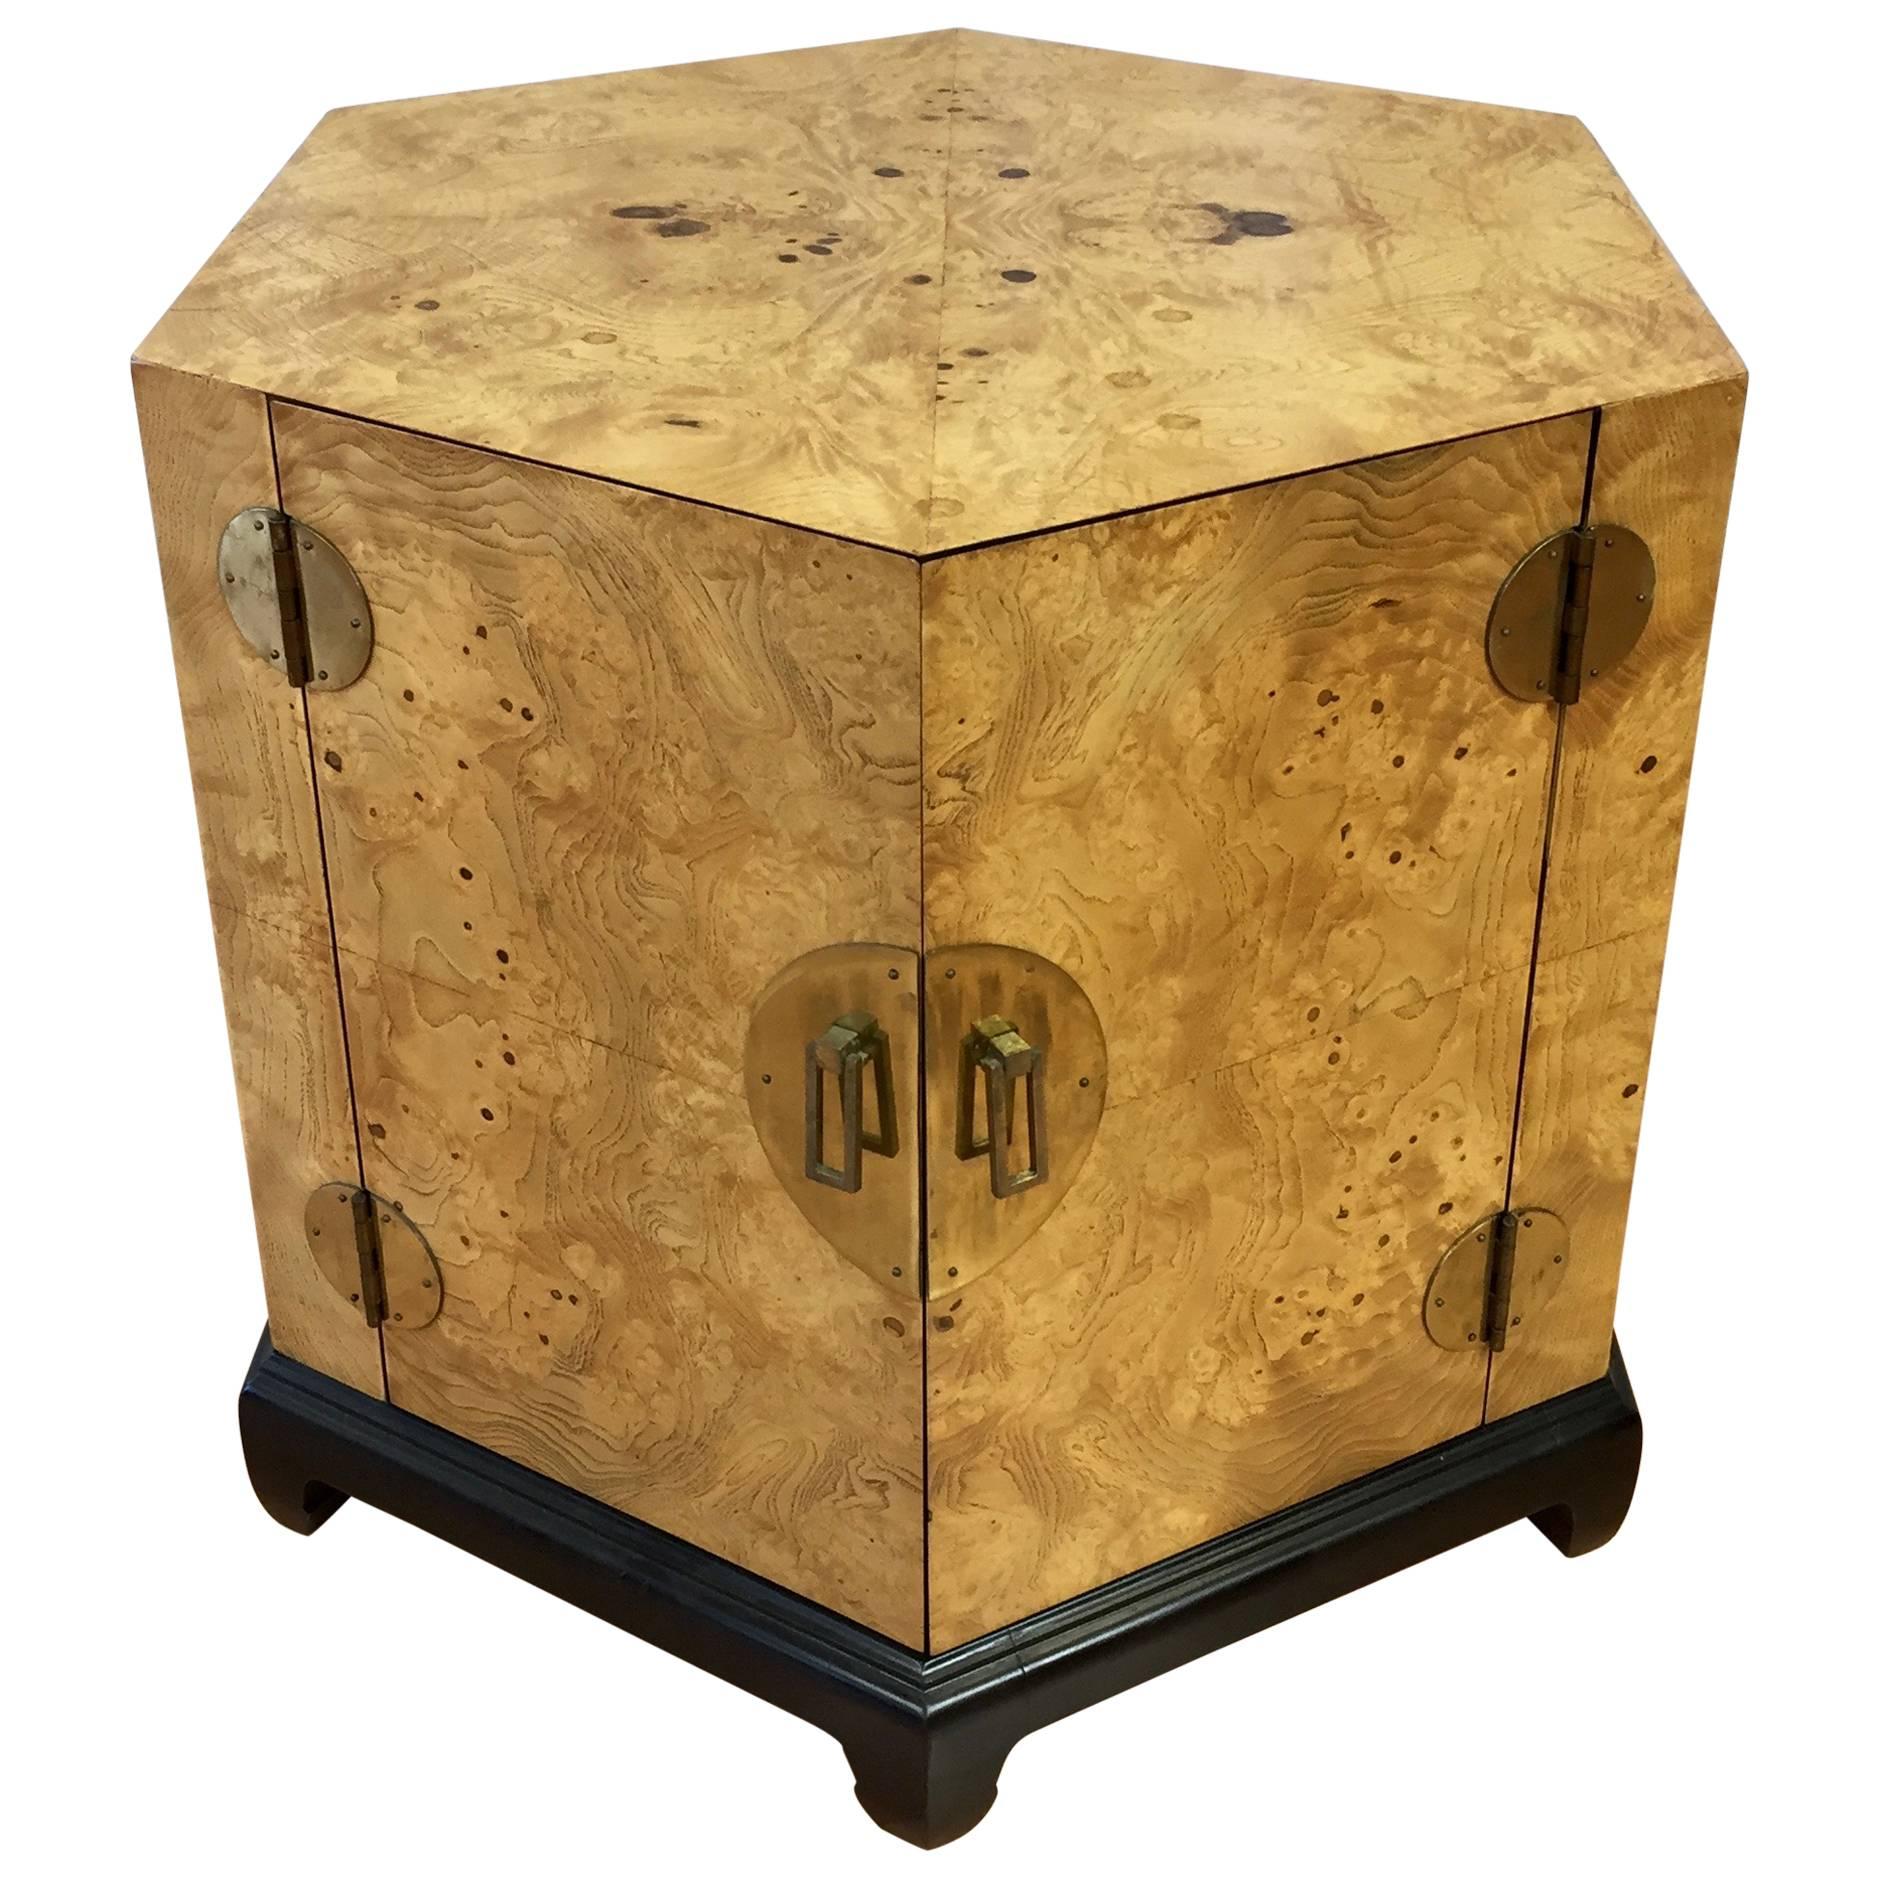 Hexagonal Burl Wood and Brass Cabinet Attributed to Henredon